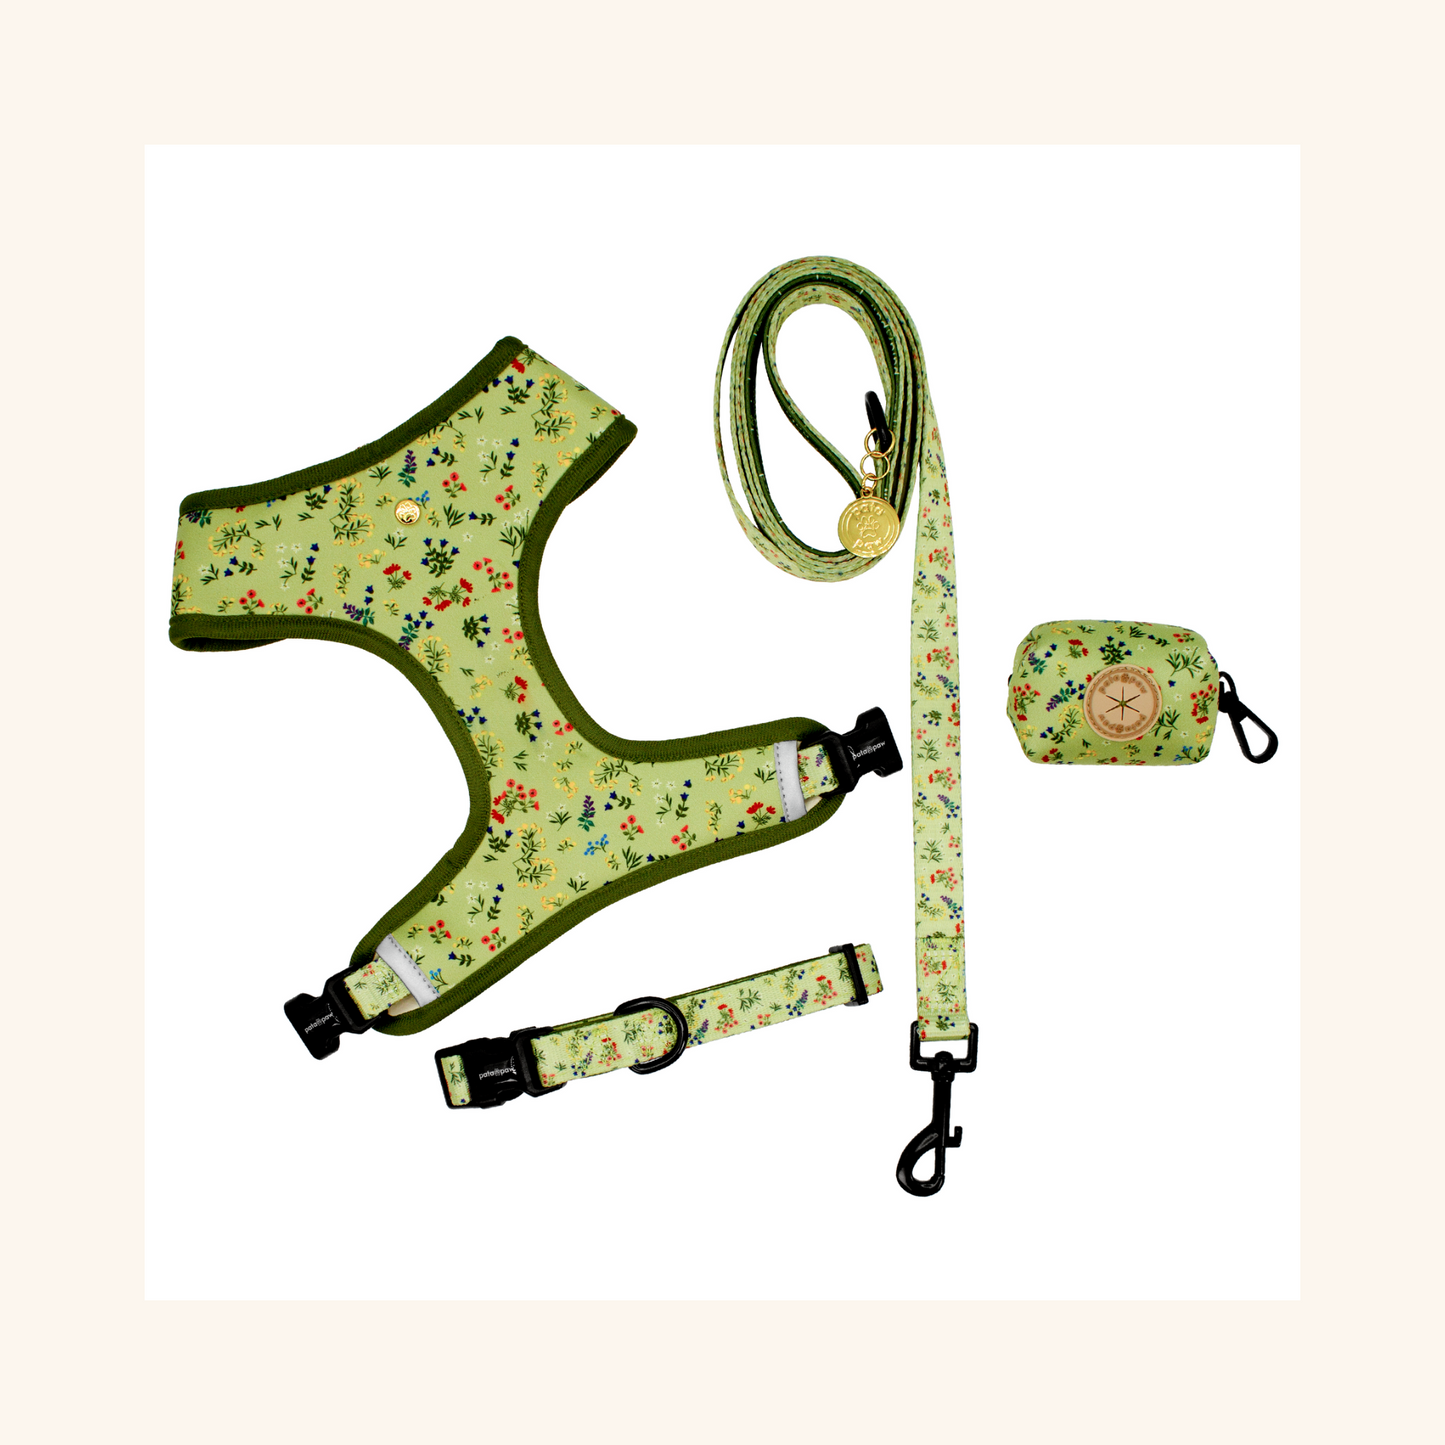 pata paw alpine wildflowers set: reversible harness, leash, collar, and poop bag holder